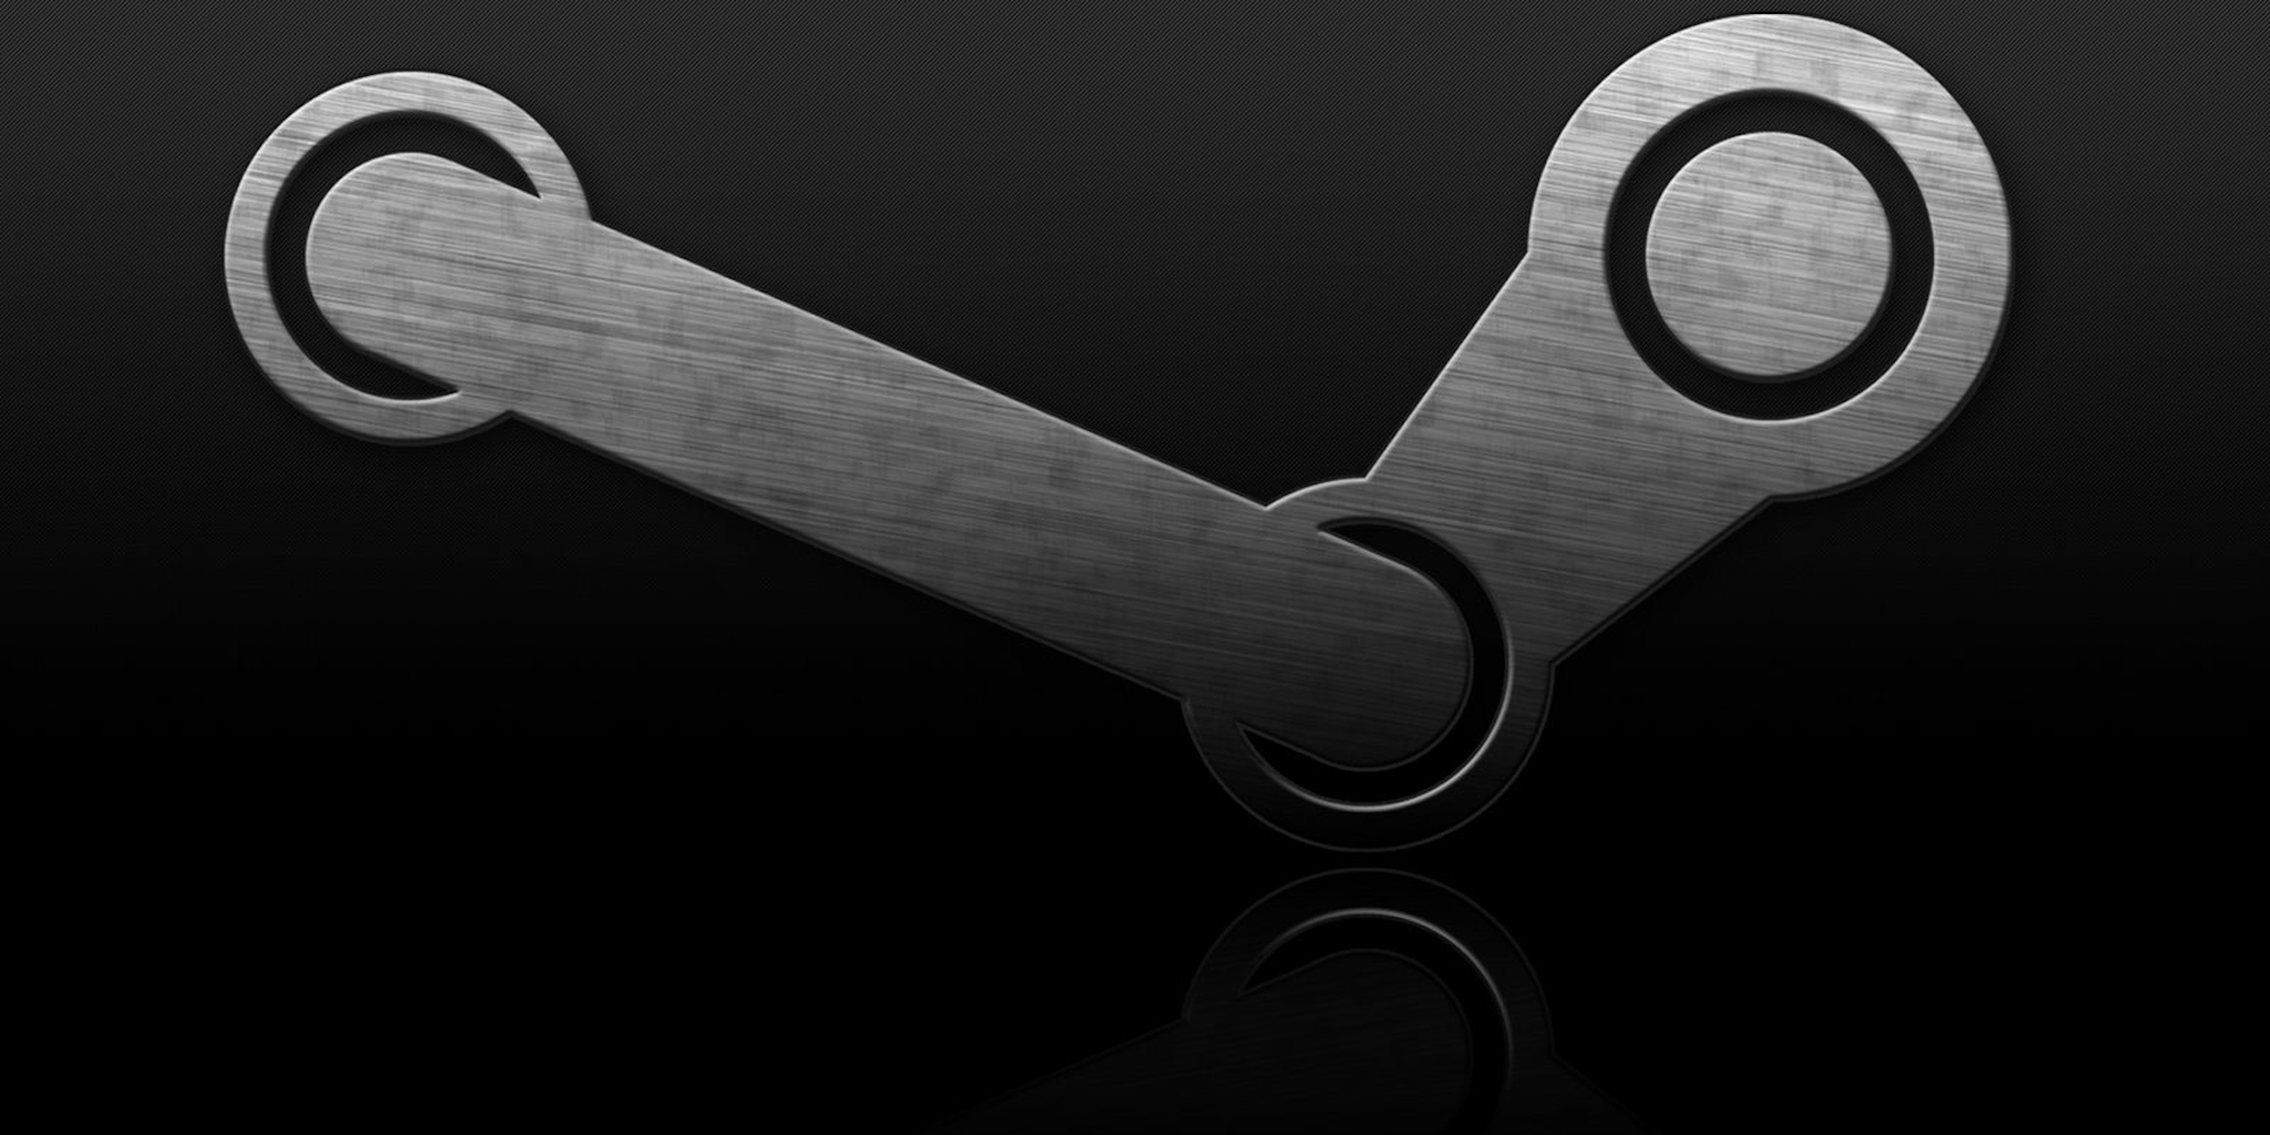 Game over, or not: what became of Steam's first Early Access games?, Steam